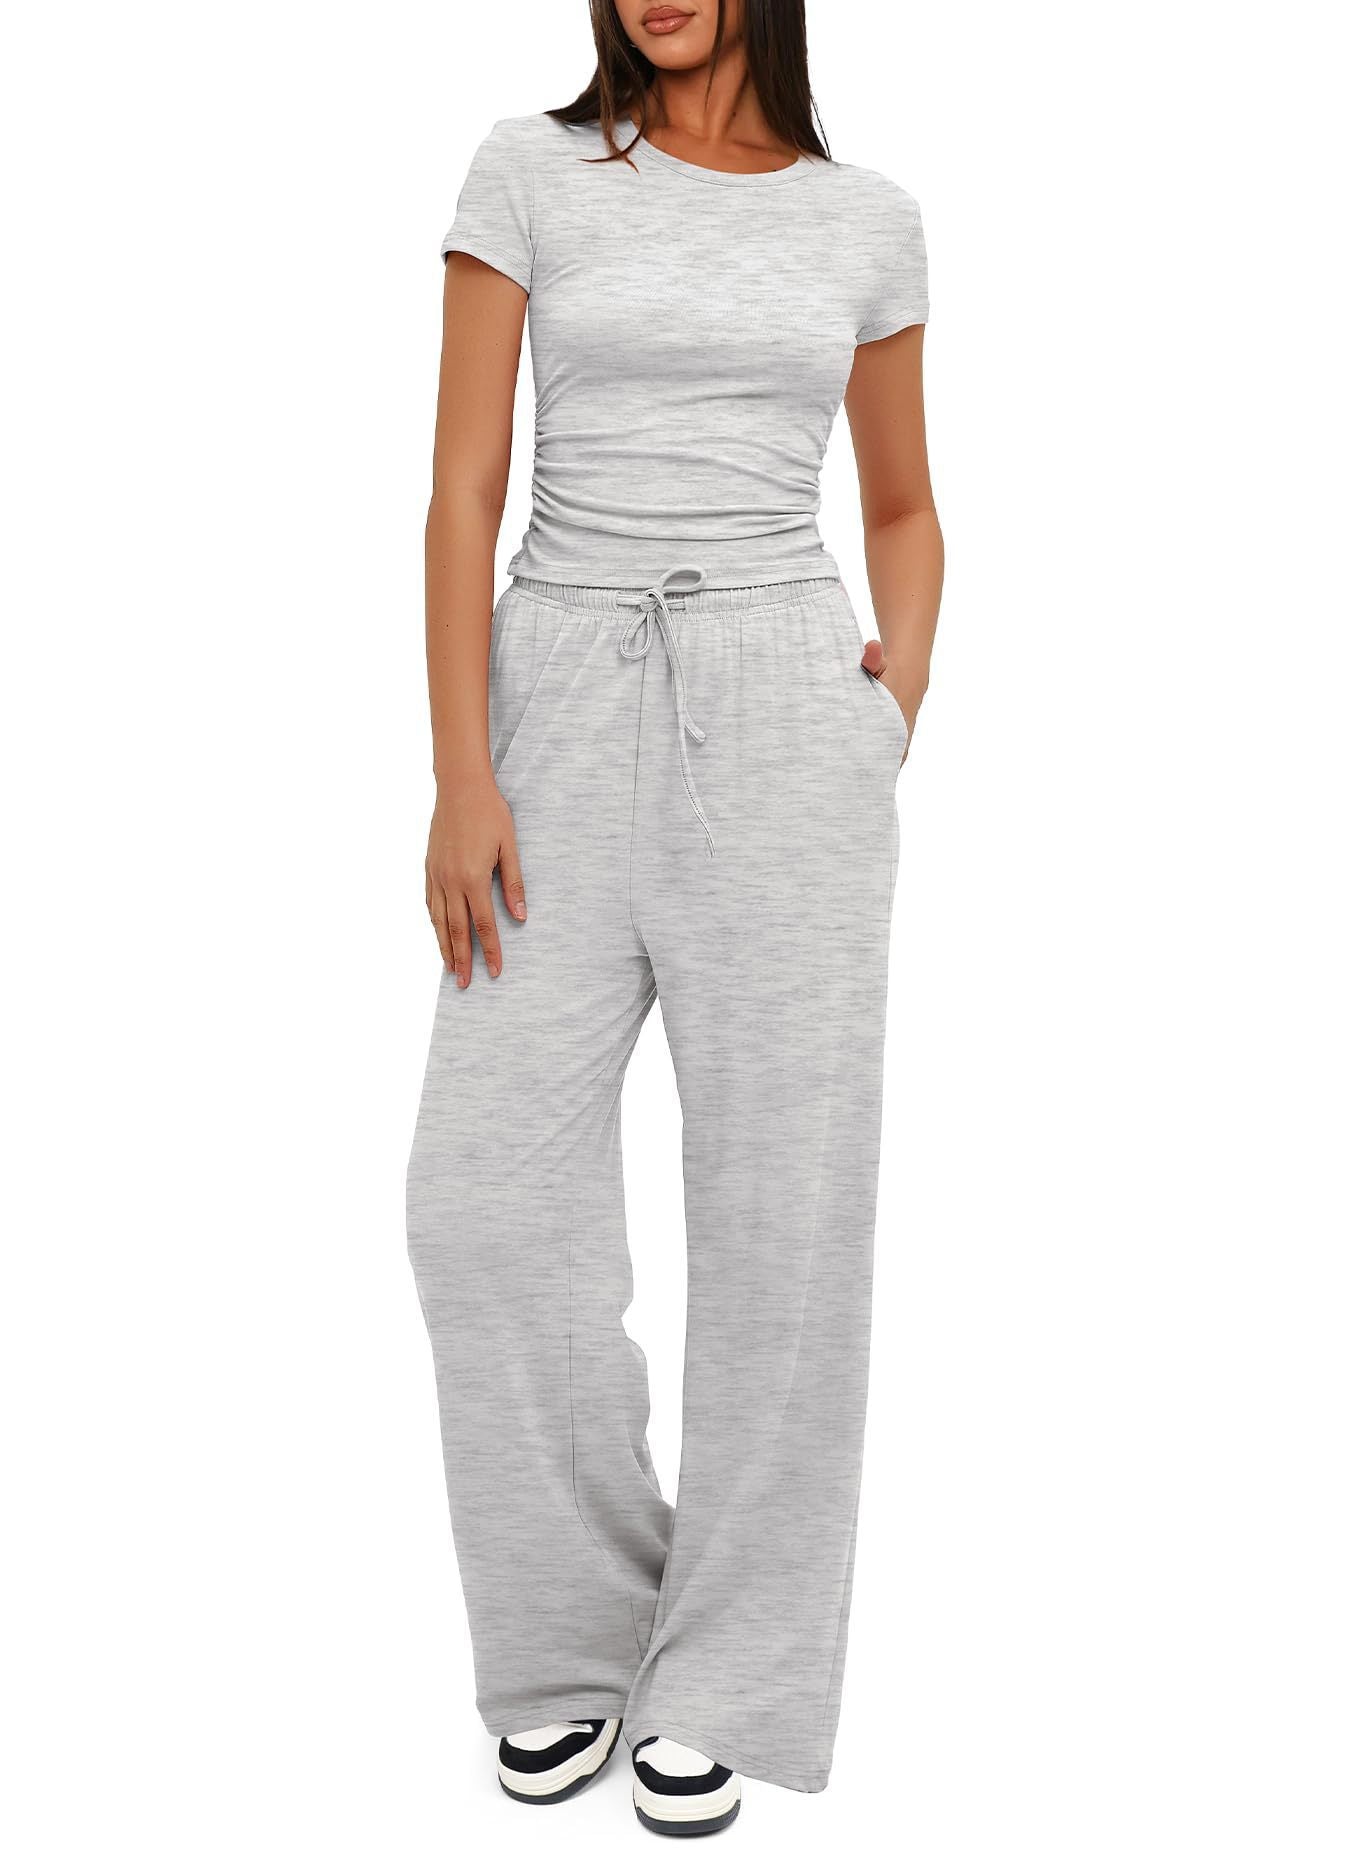 Light Grey - 2pcs Solid Color Casual Sport Short-sleeved Women'sTop And High-waisted Drawstring Wide-leg Pants - womens pants set at TFC&H Co.